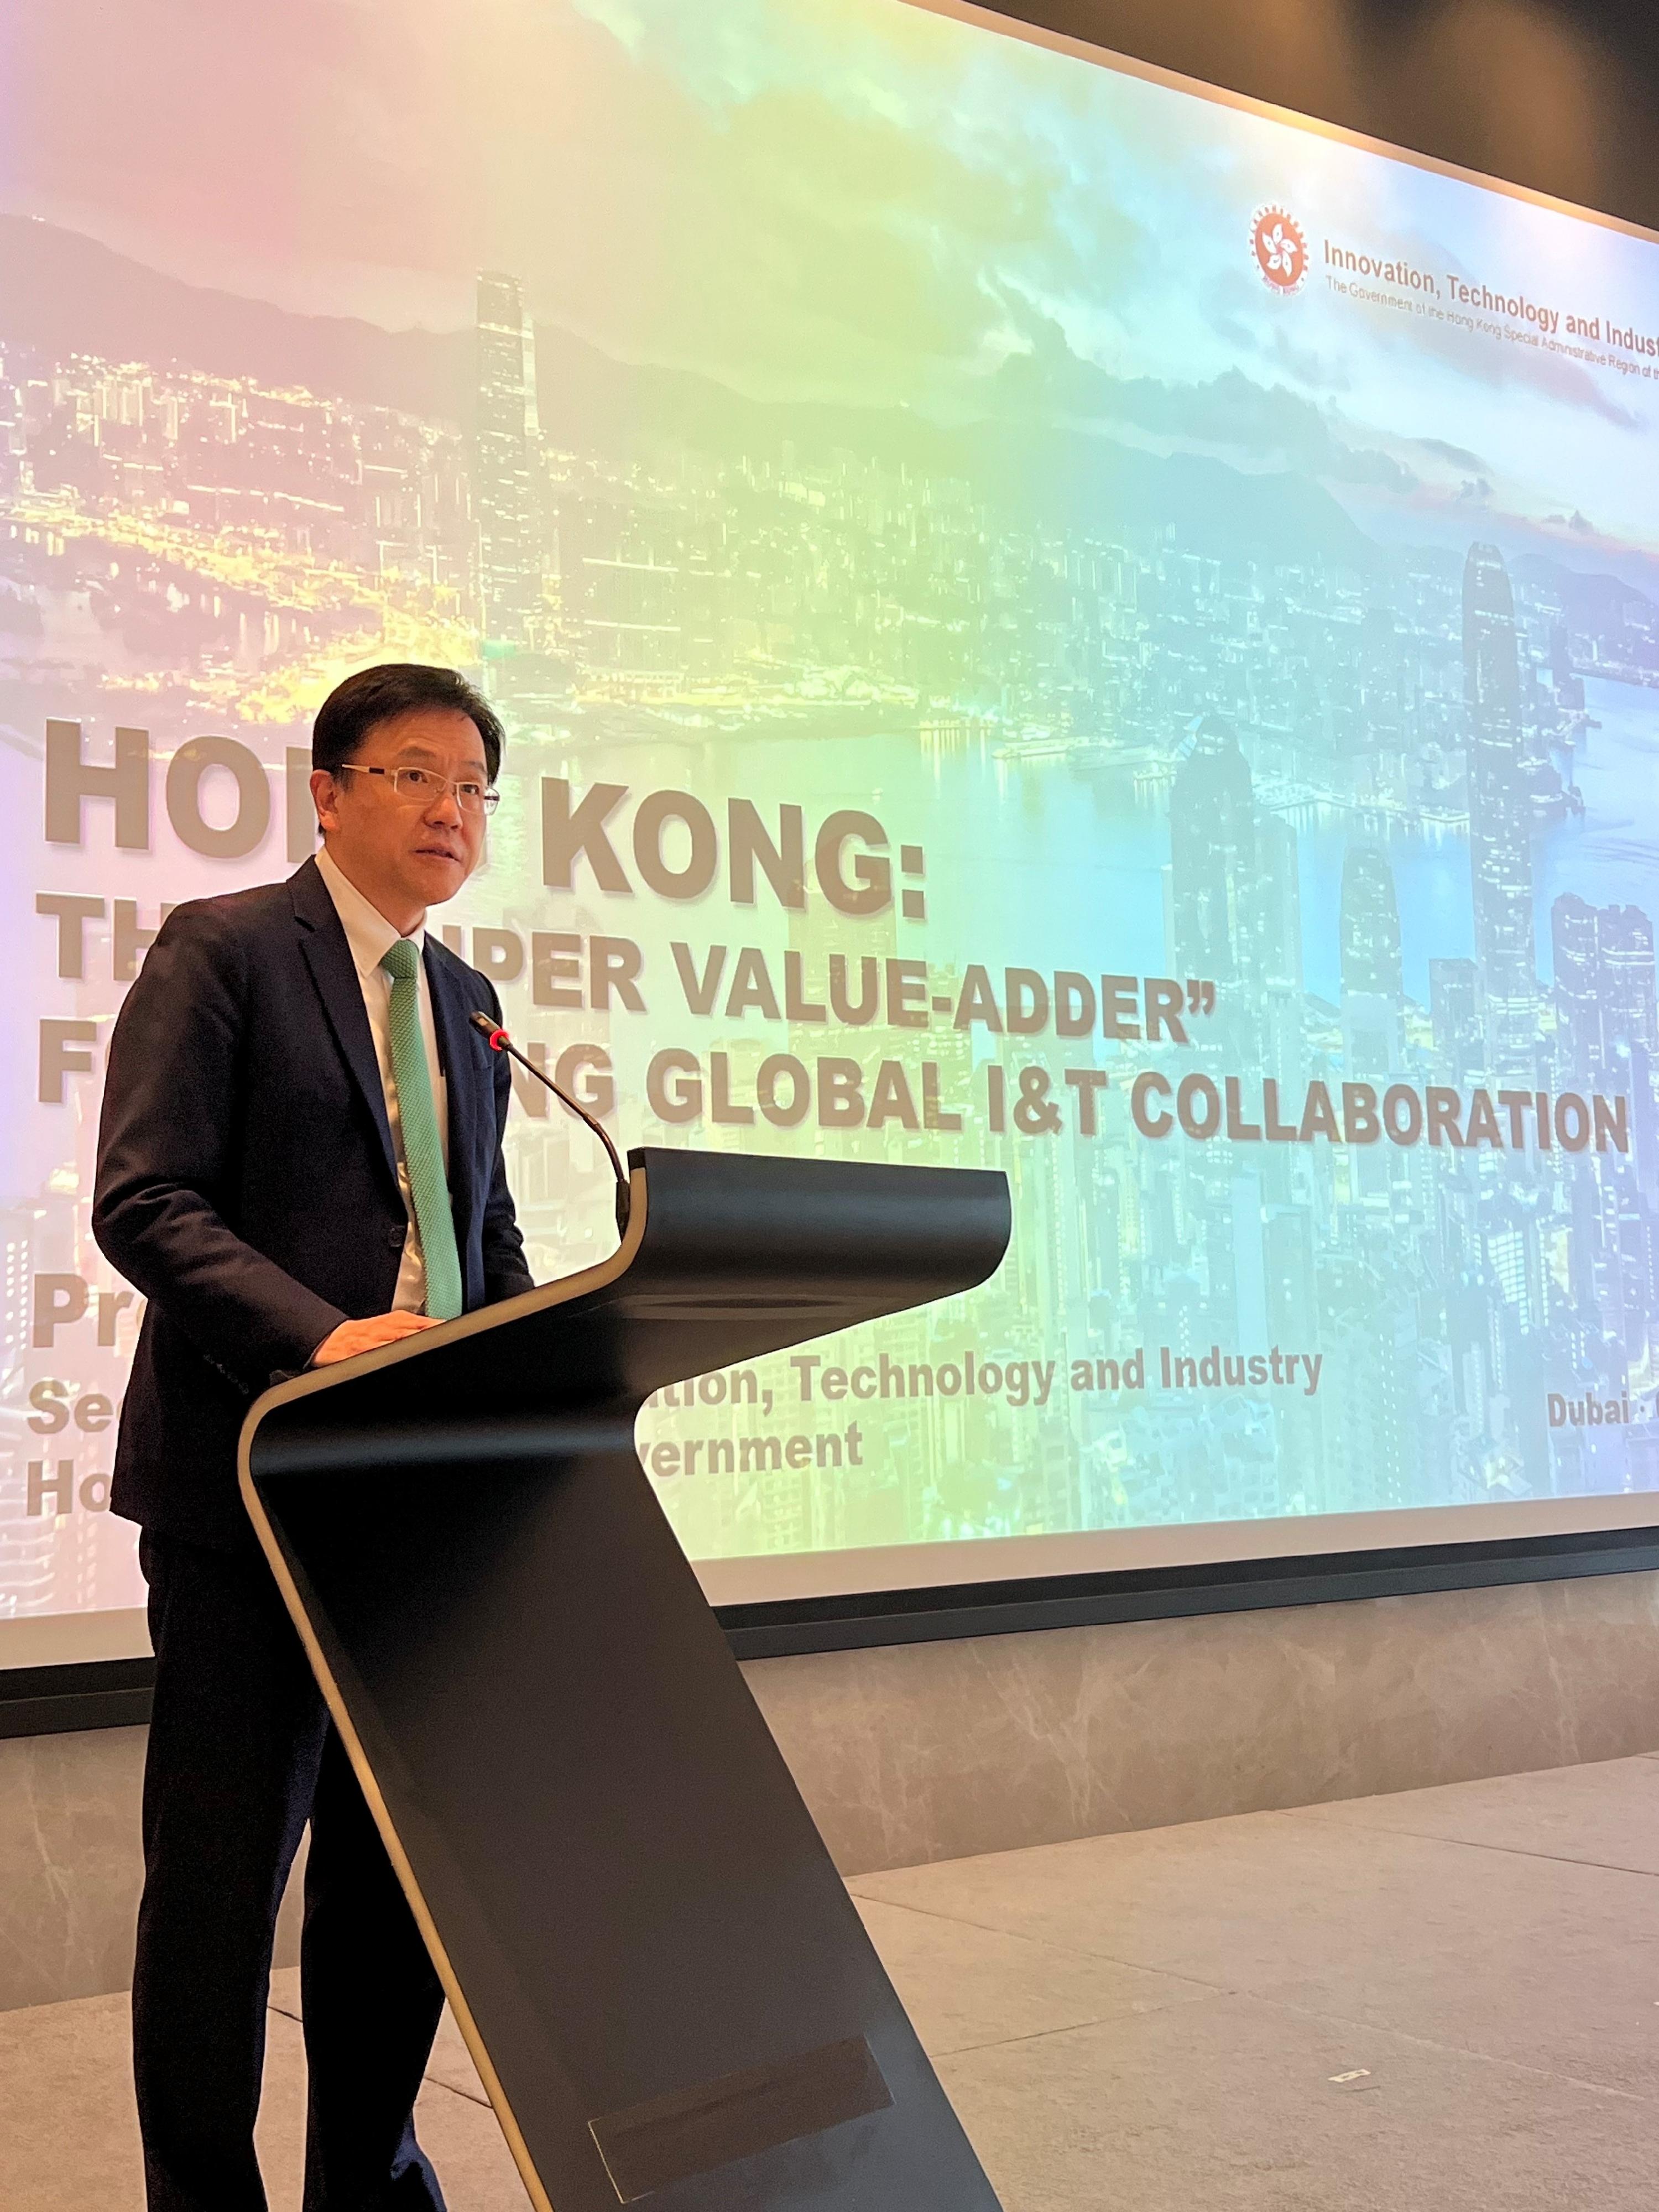 The Secretary for Innovation, Technology and Industry, Professor Sun Dong, attended a business luncheon hosted by the Hong Kong Economic and Trade Office in Dubai on March 6 (Dubai time), and delivered a keynote speech to about 120 guests from local government and businesses, particularly leaders and executives from the United Arab Emirates' innovation and technology community.